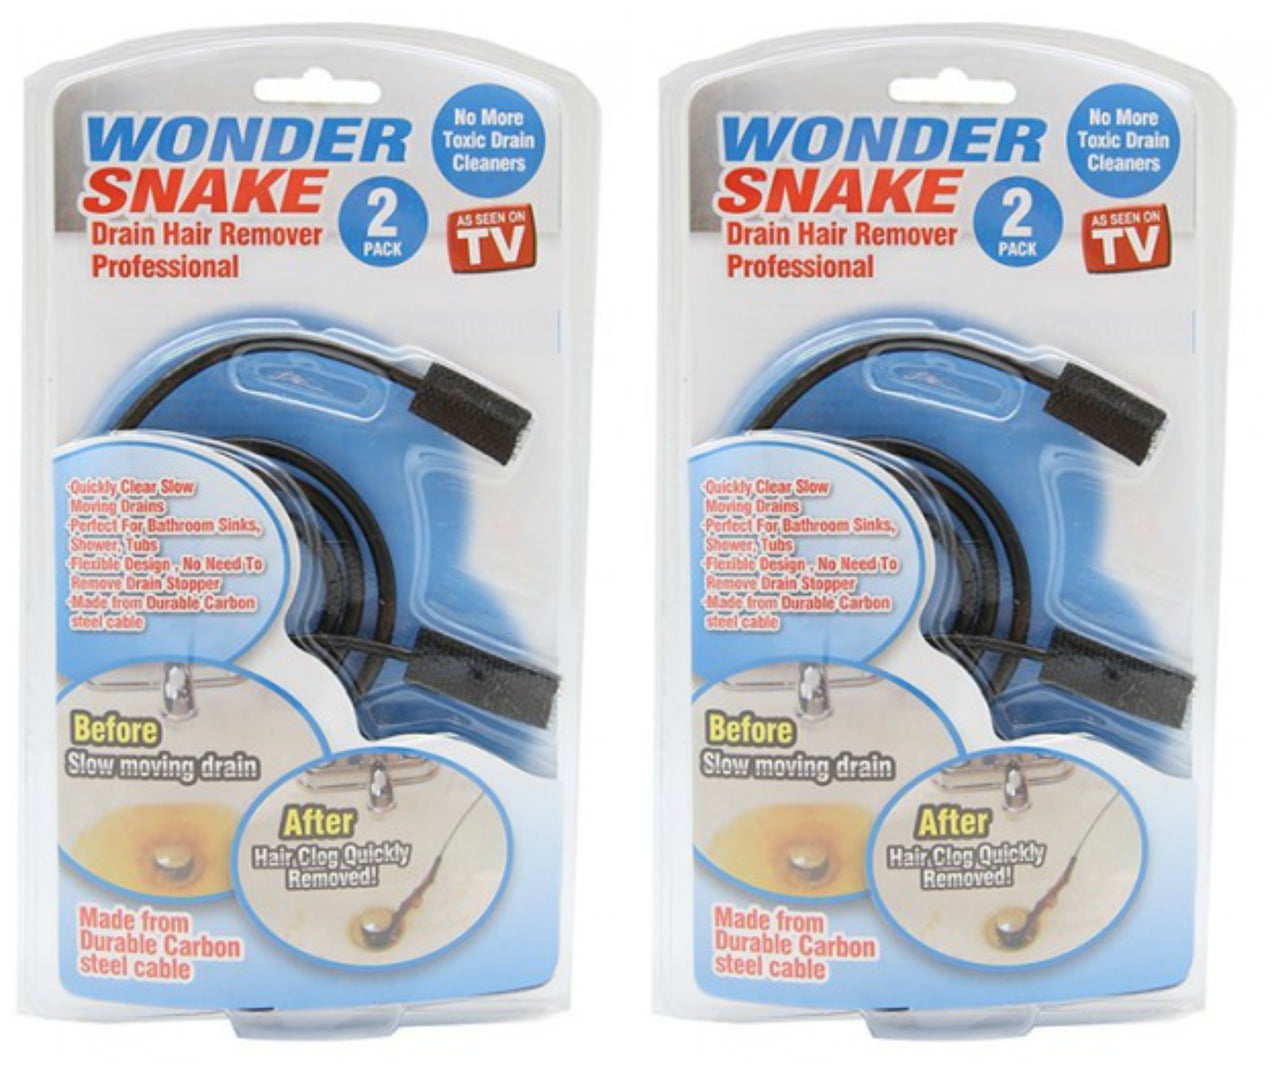 Turbo Snake - As Seen On TV Product Testing 